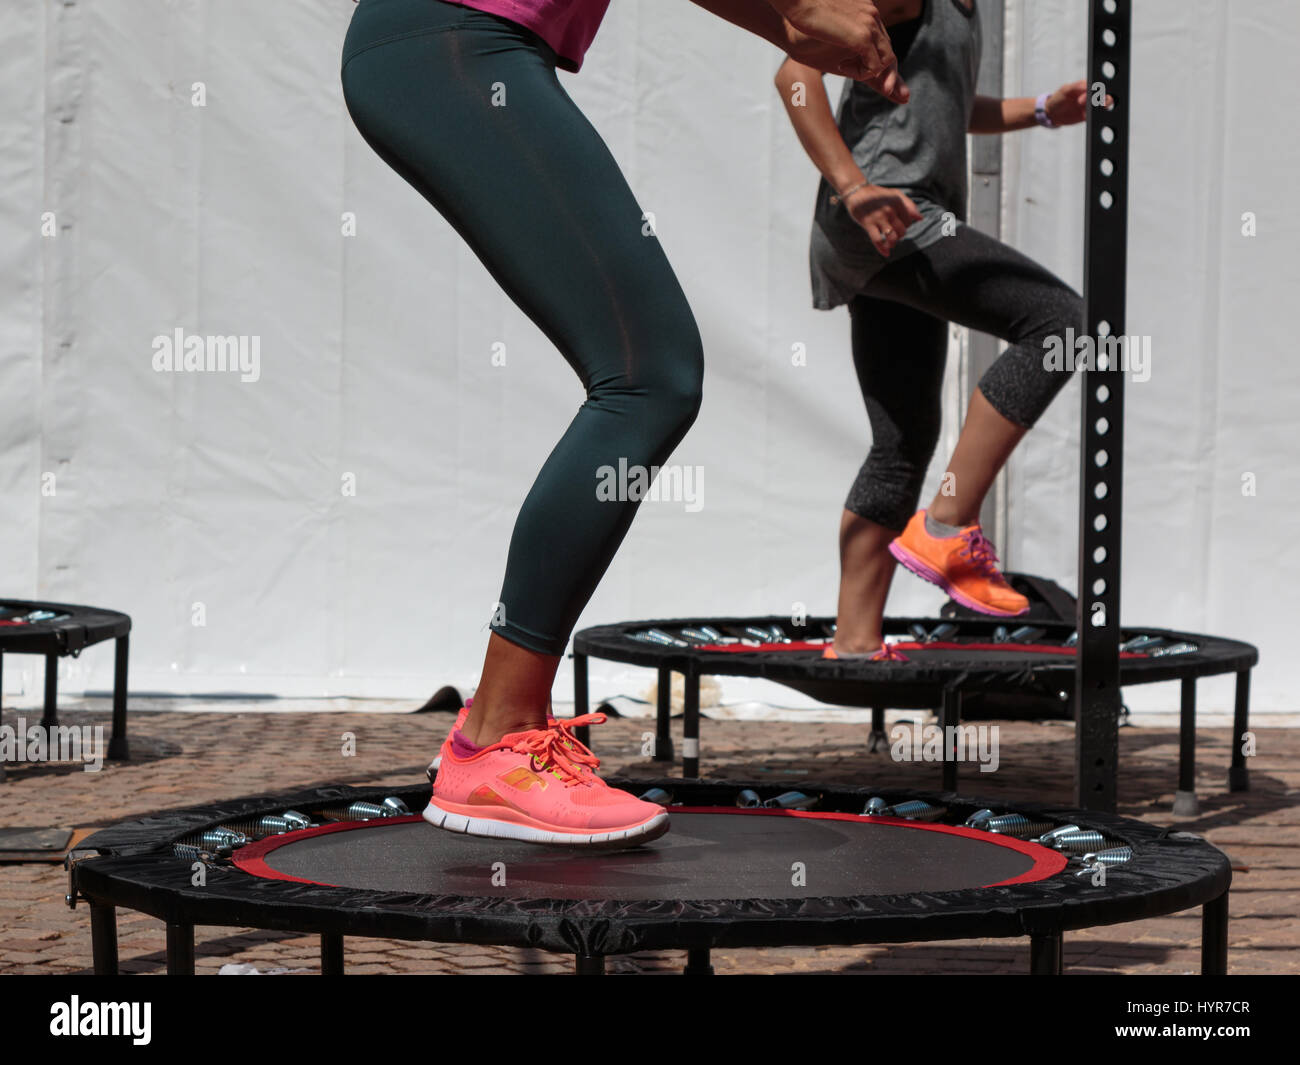 Mini Trampoline Workout: Girl doing Fitness Exercise in Class at Gym Stock  Photo - Alamy